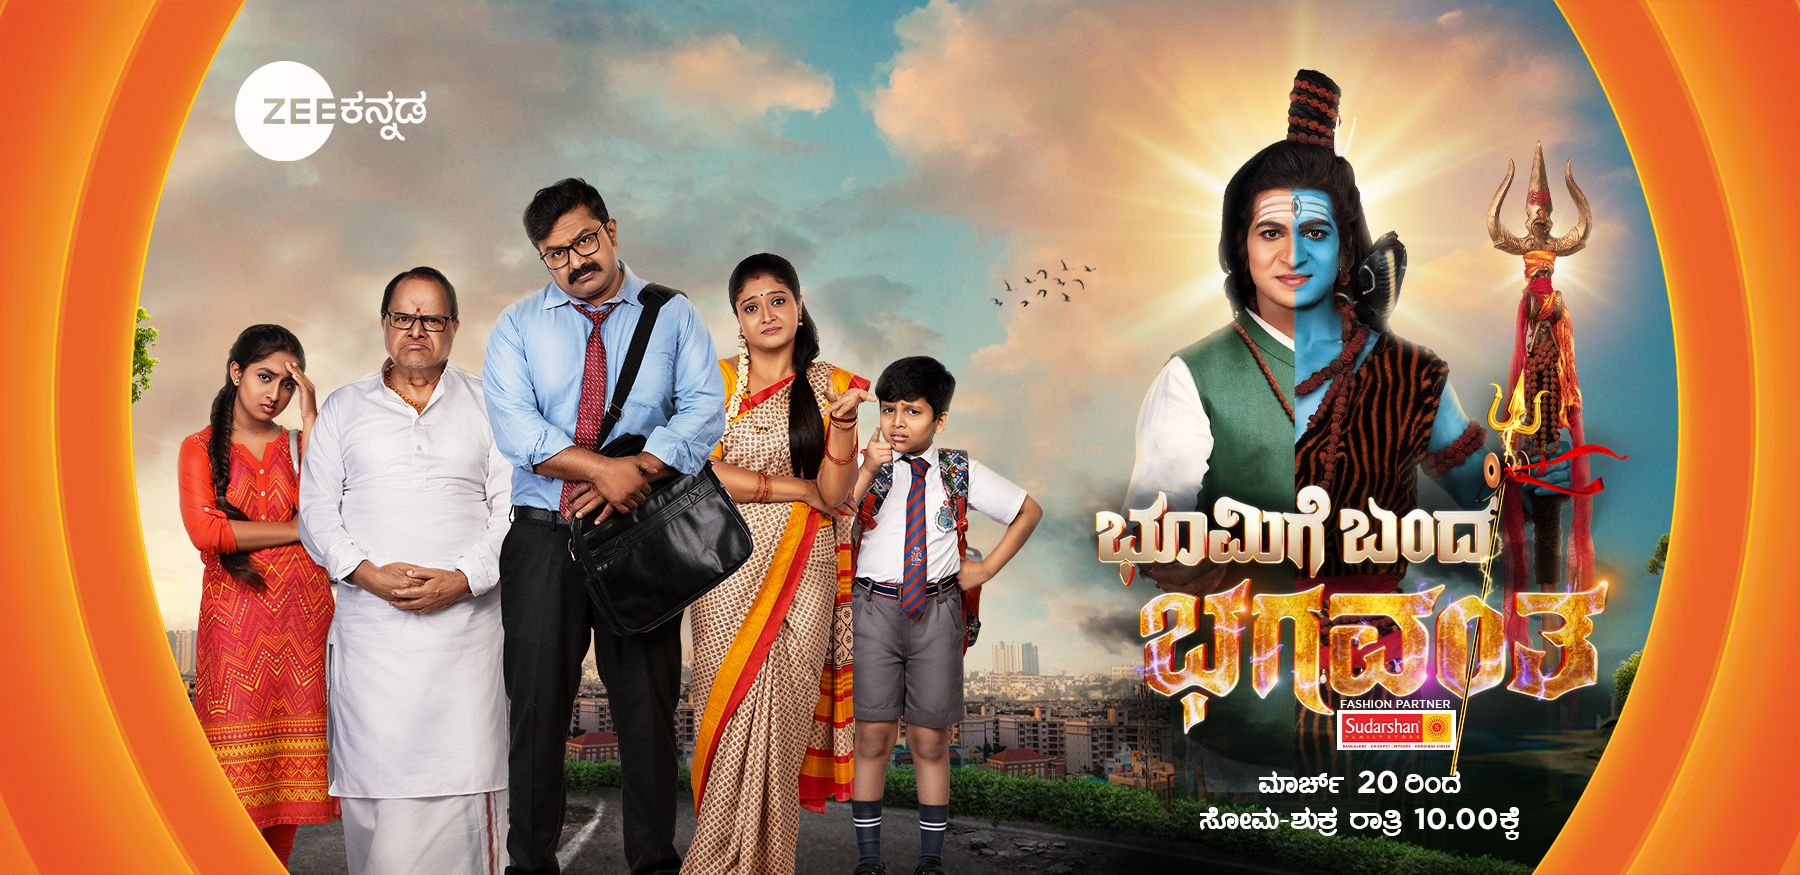 Amruthadhaare Serial On Zee Kannada Channel Launching on 29th May at 07:00 PM 18